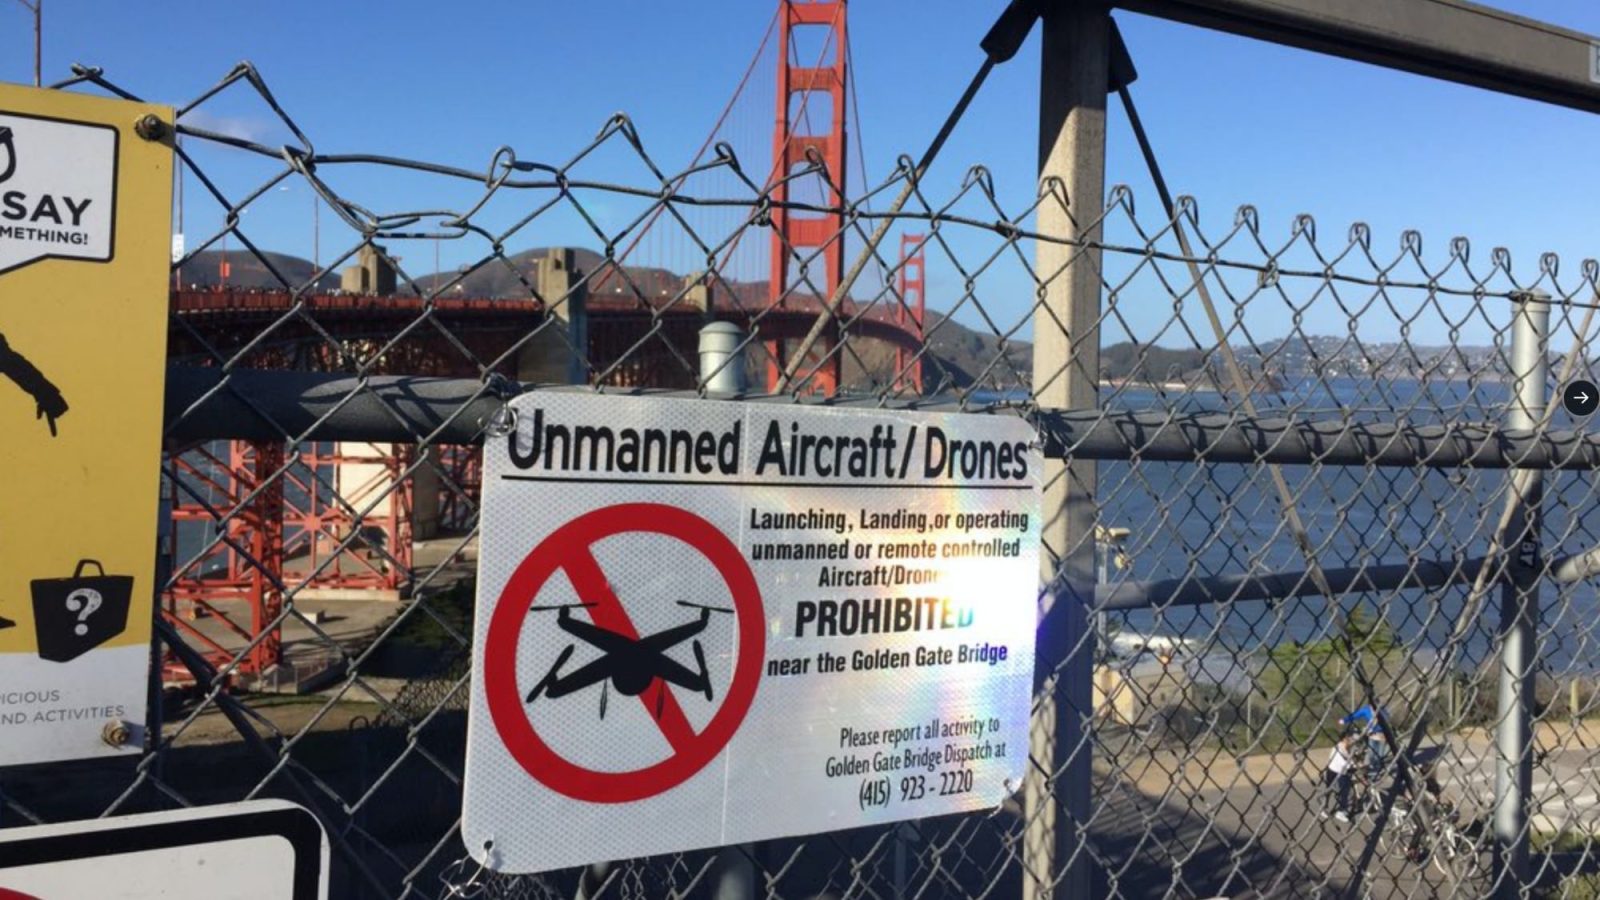 Illegal drone flights and crashes at the Golden Gate Bridge